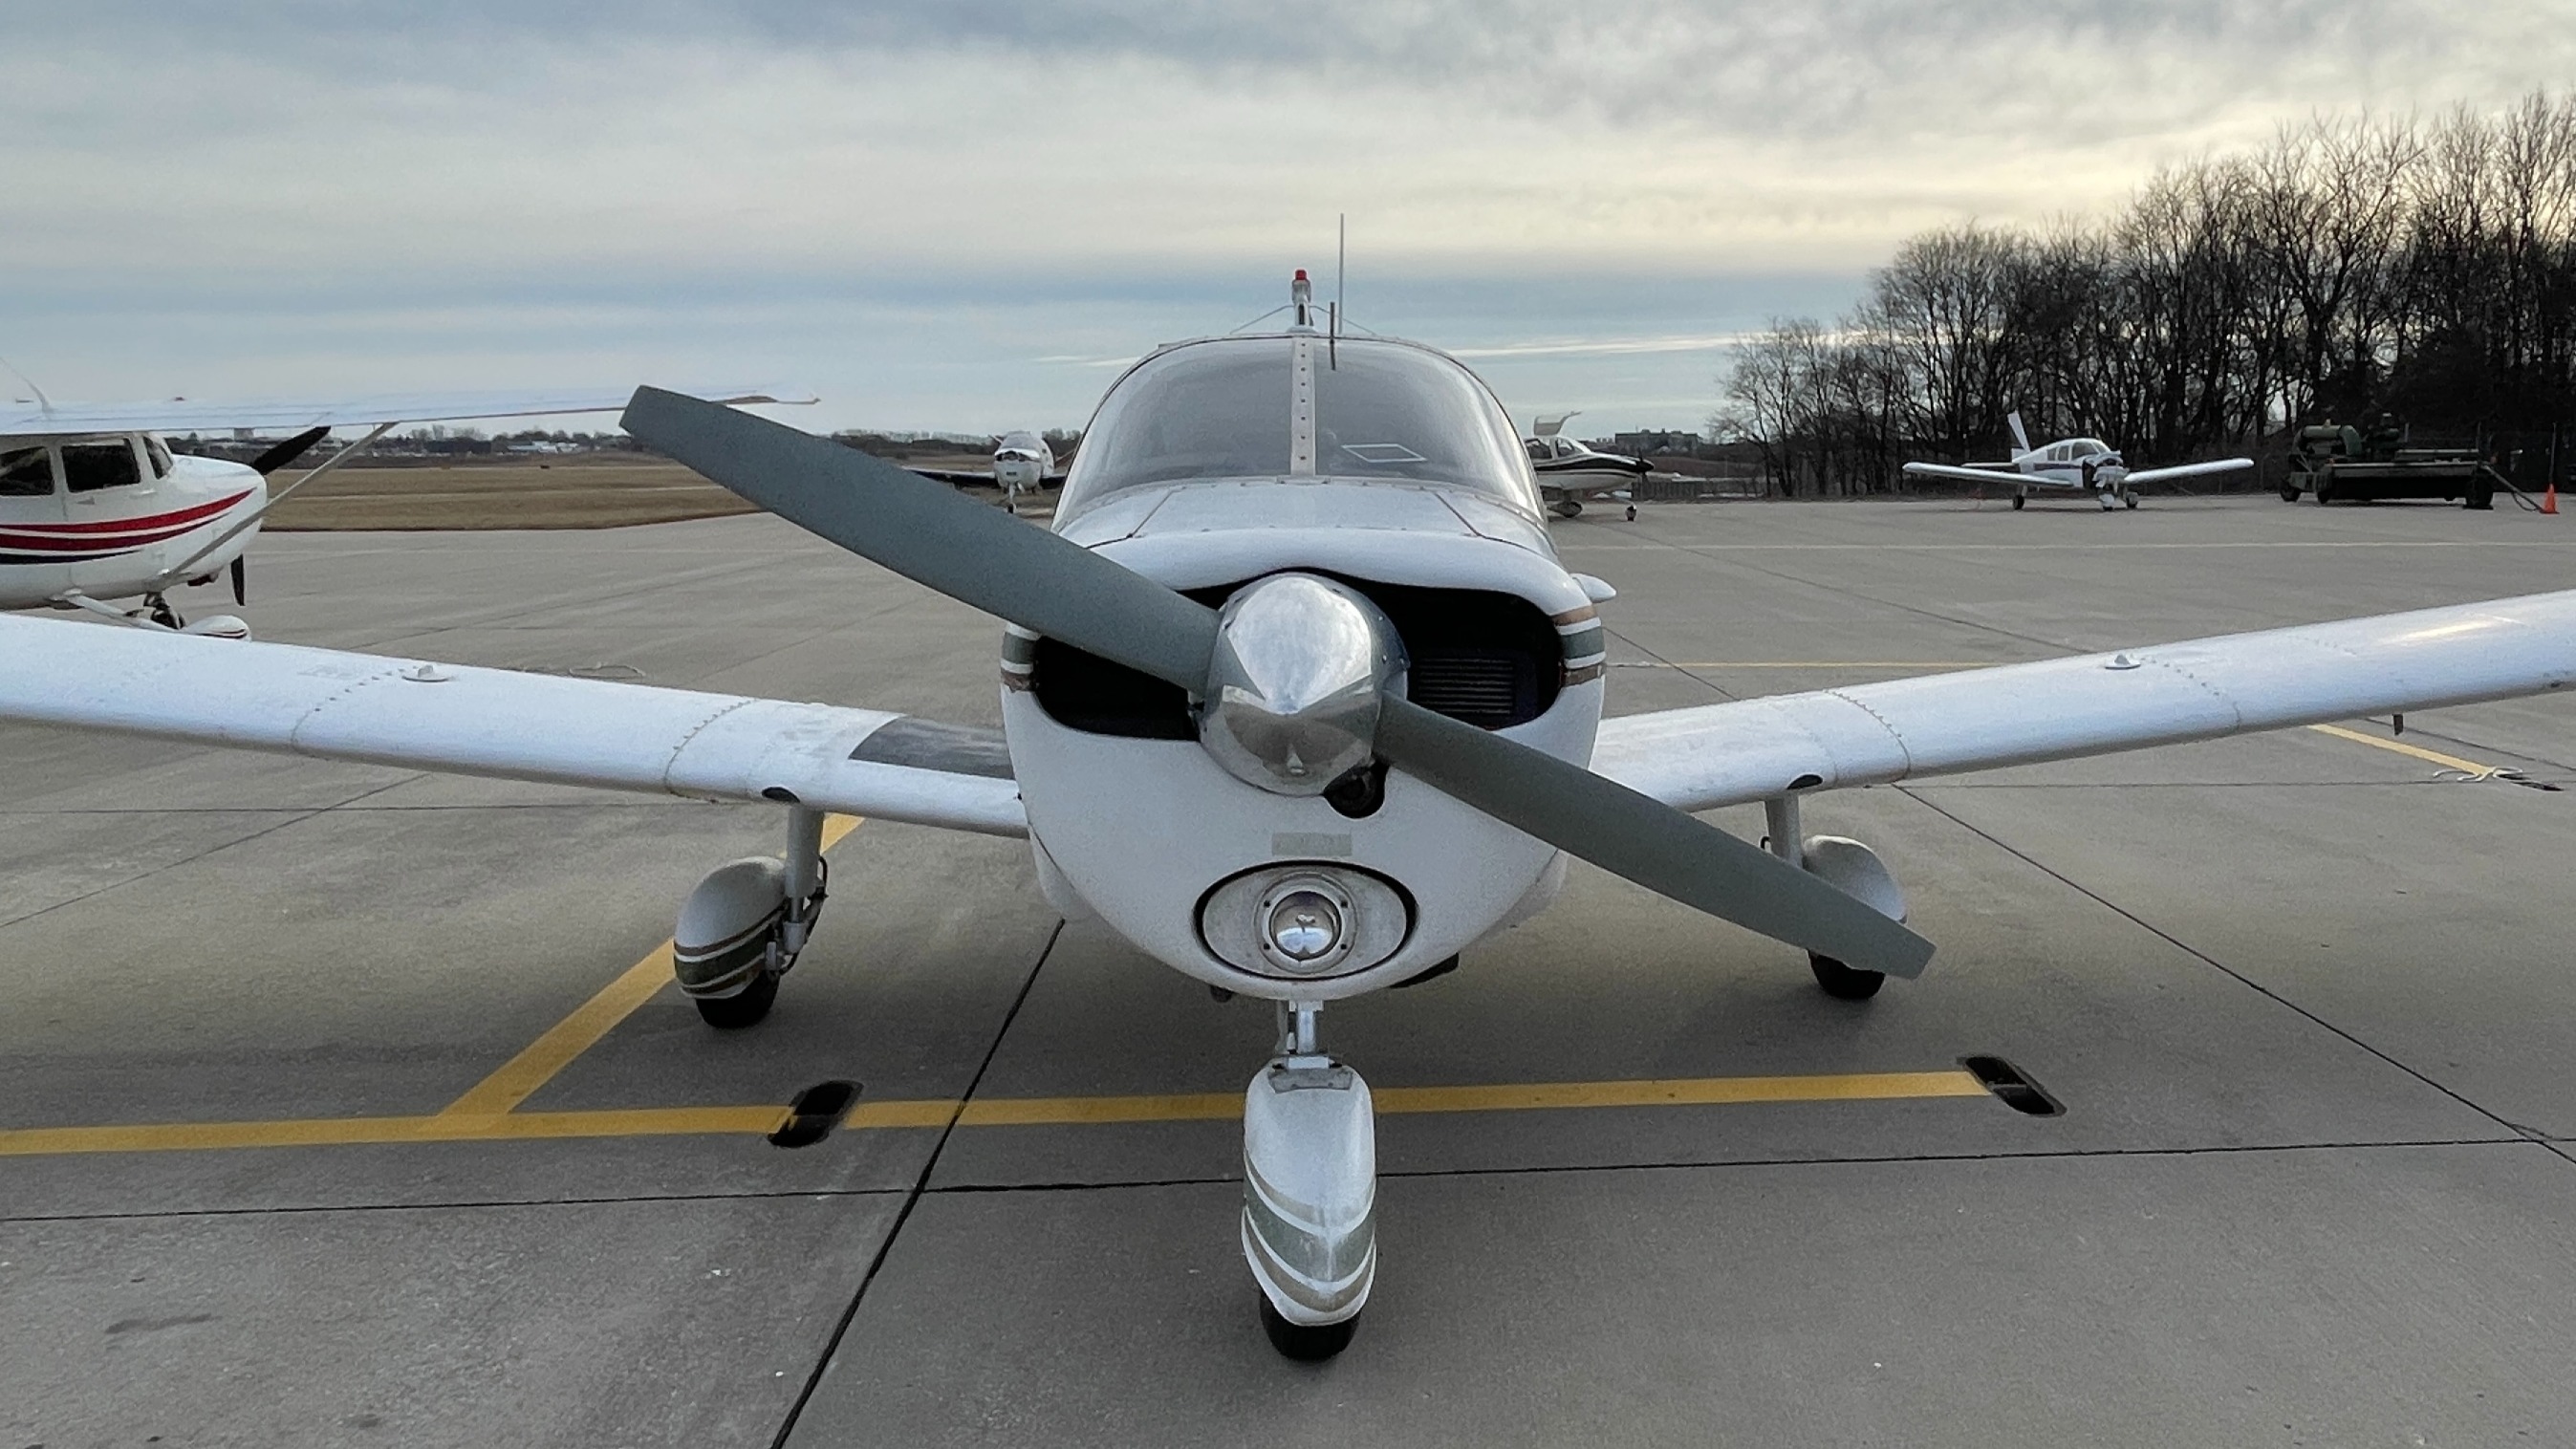 Front view of a piper aircraft parked on a runway.